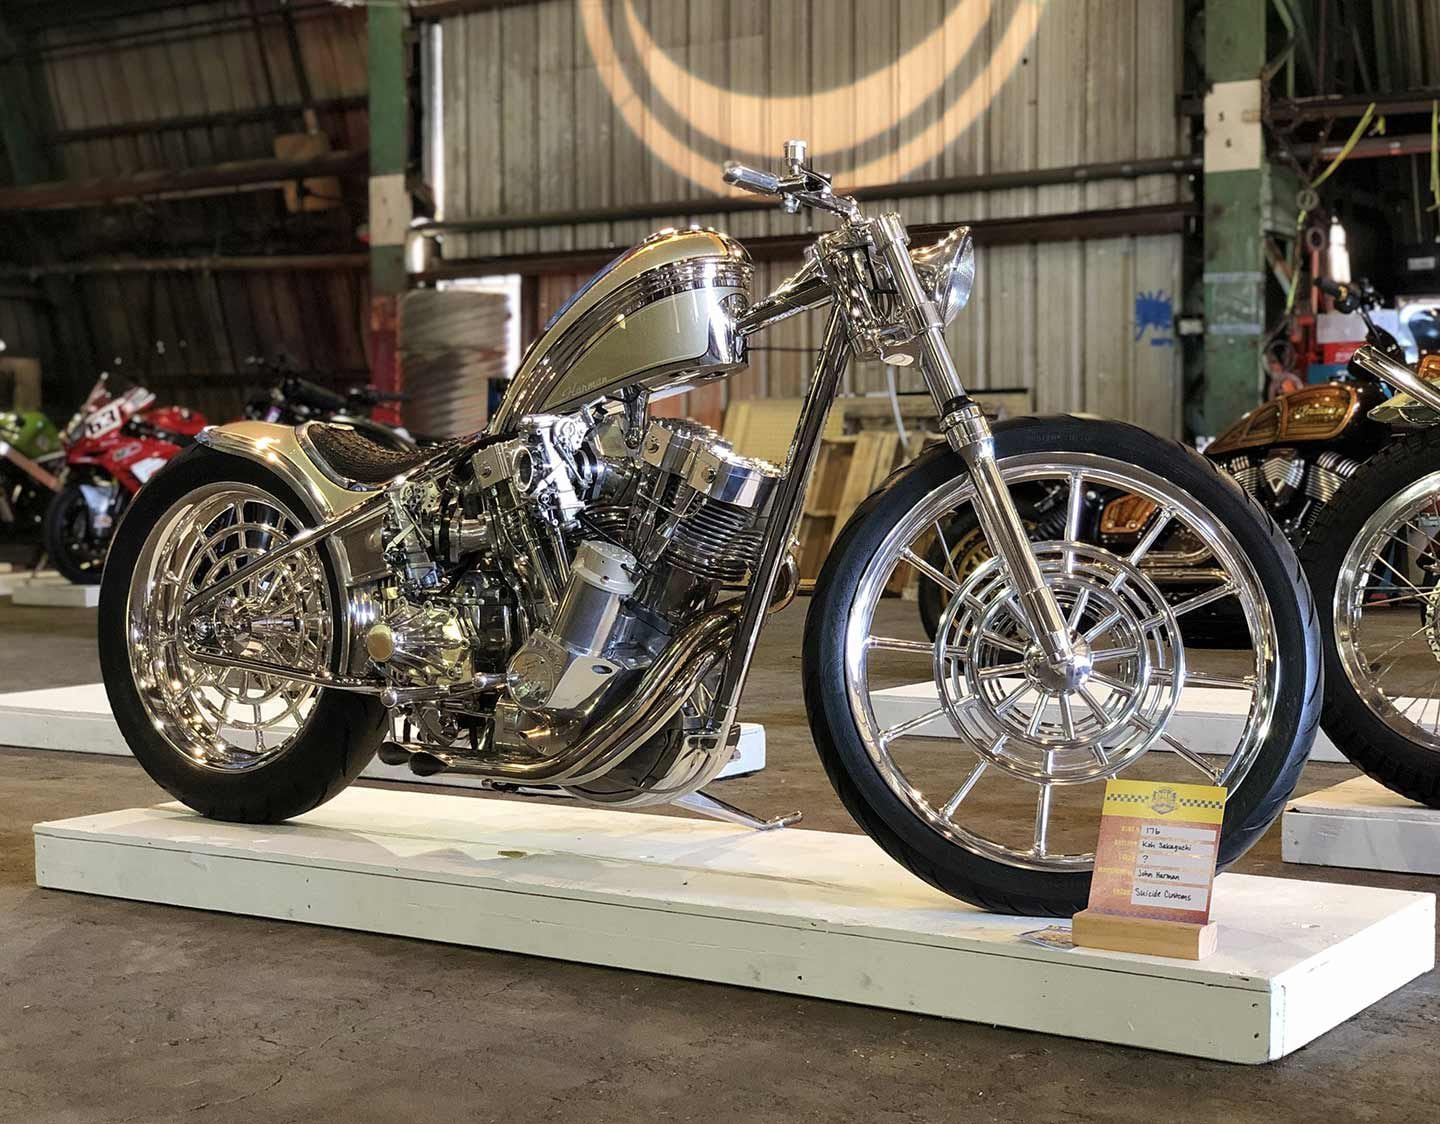 Another beauty from Koh Sakaguchi and Suicide Customs Inc., straight from Japan. This one is called the Harman bike, and the level of detail is amazing.